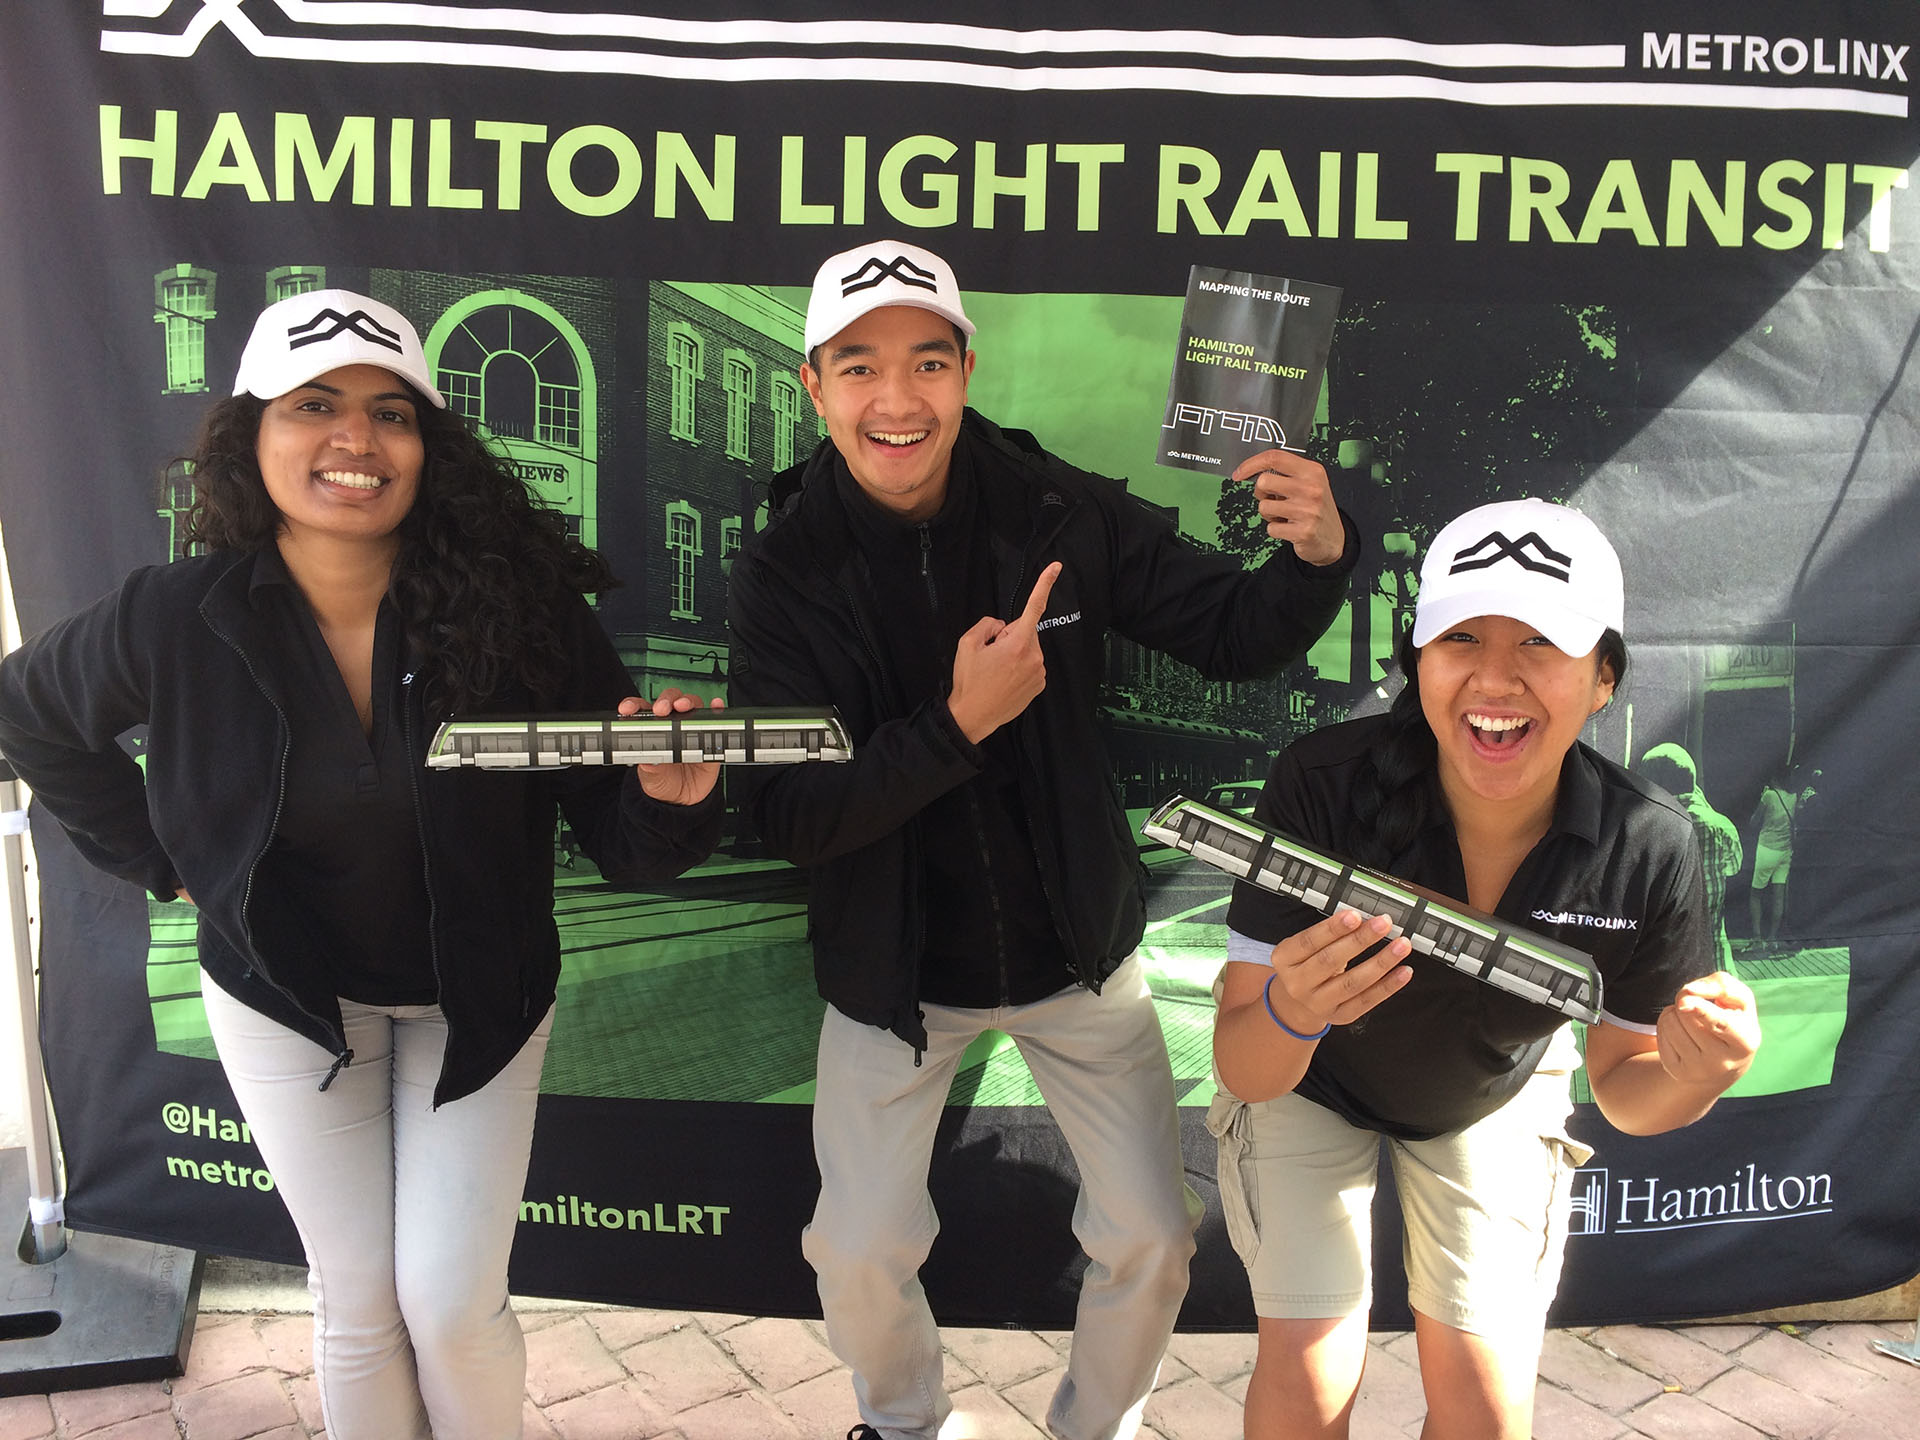 A group of brand ambassadors standing in front of a Metrolinx sign